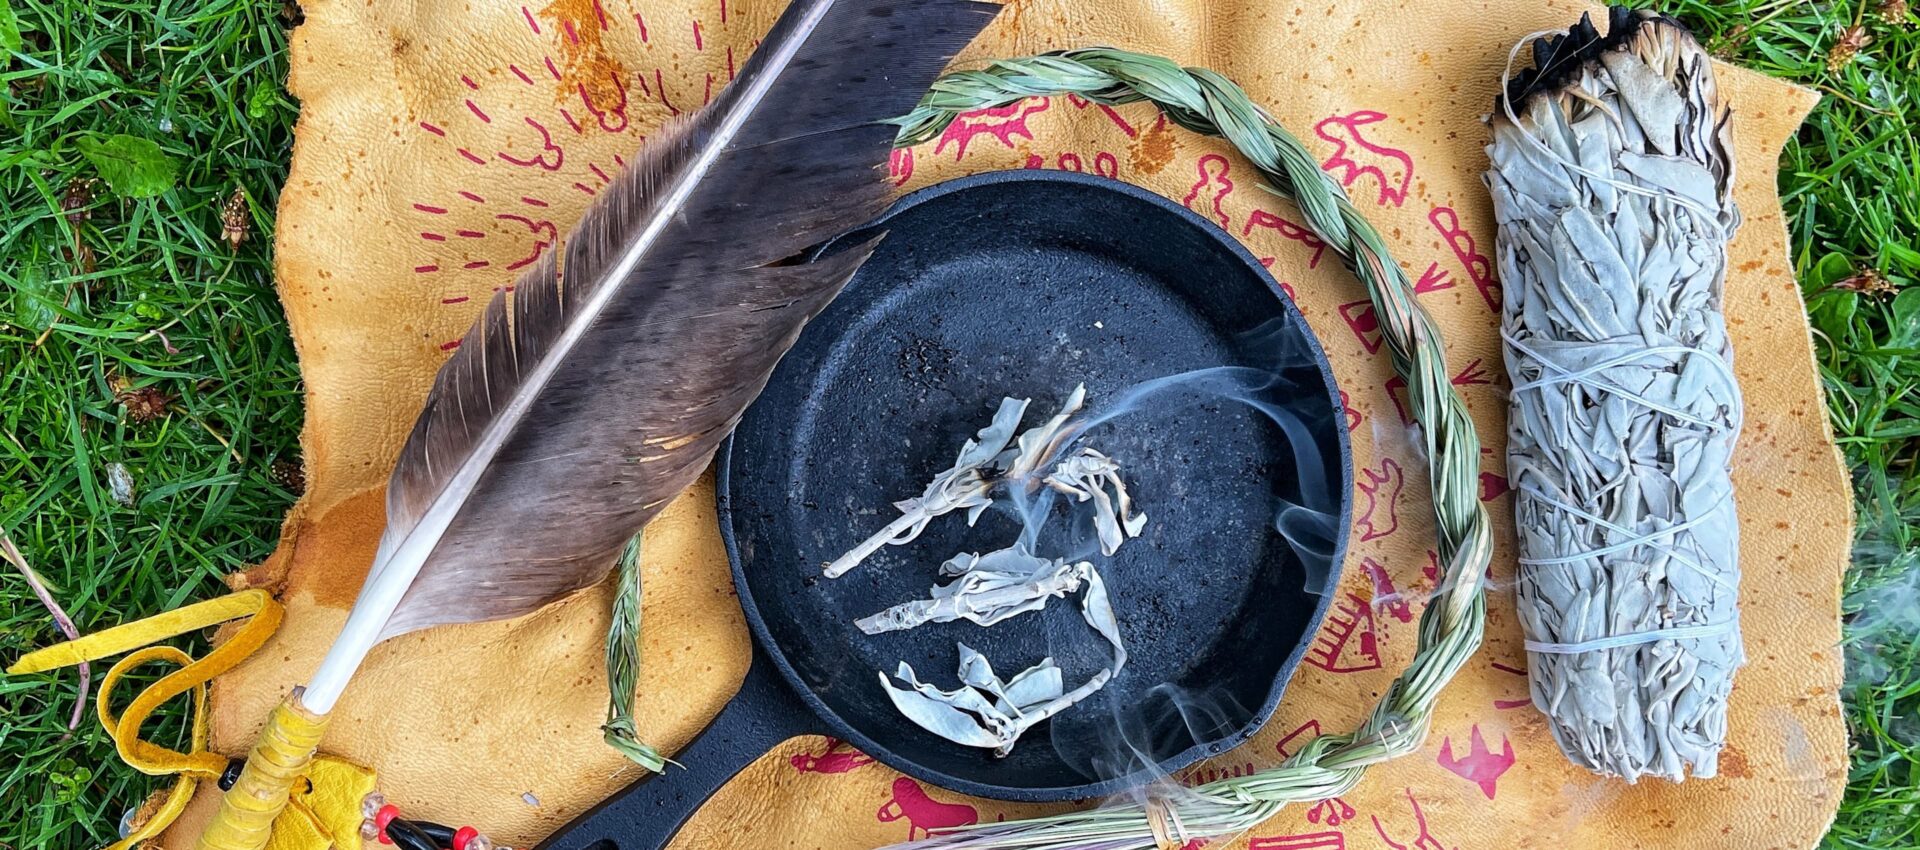 Photo of a feather, a pot with incense placing on a leather skin